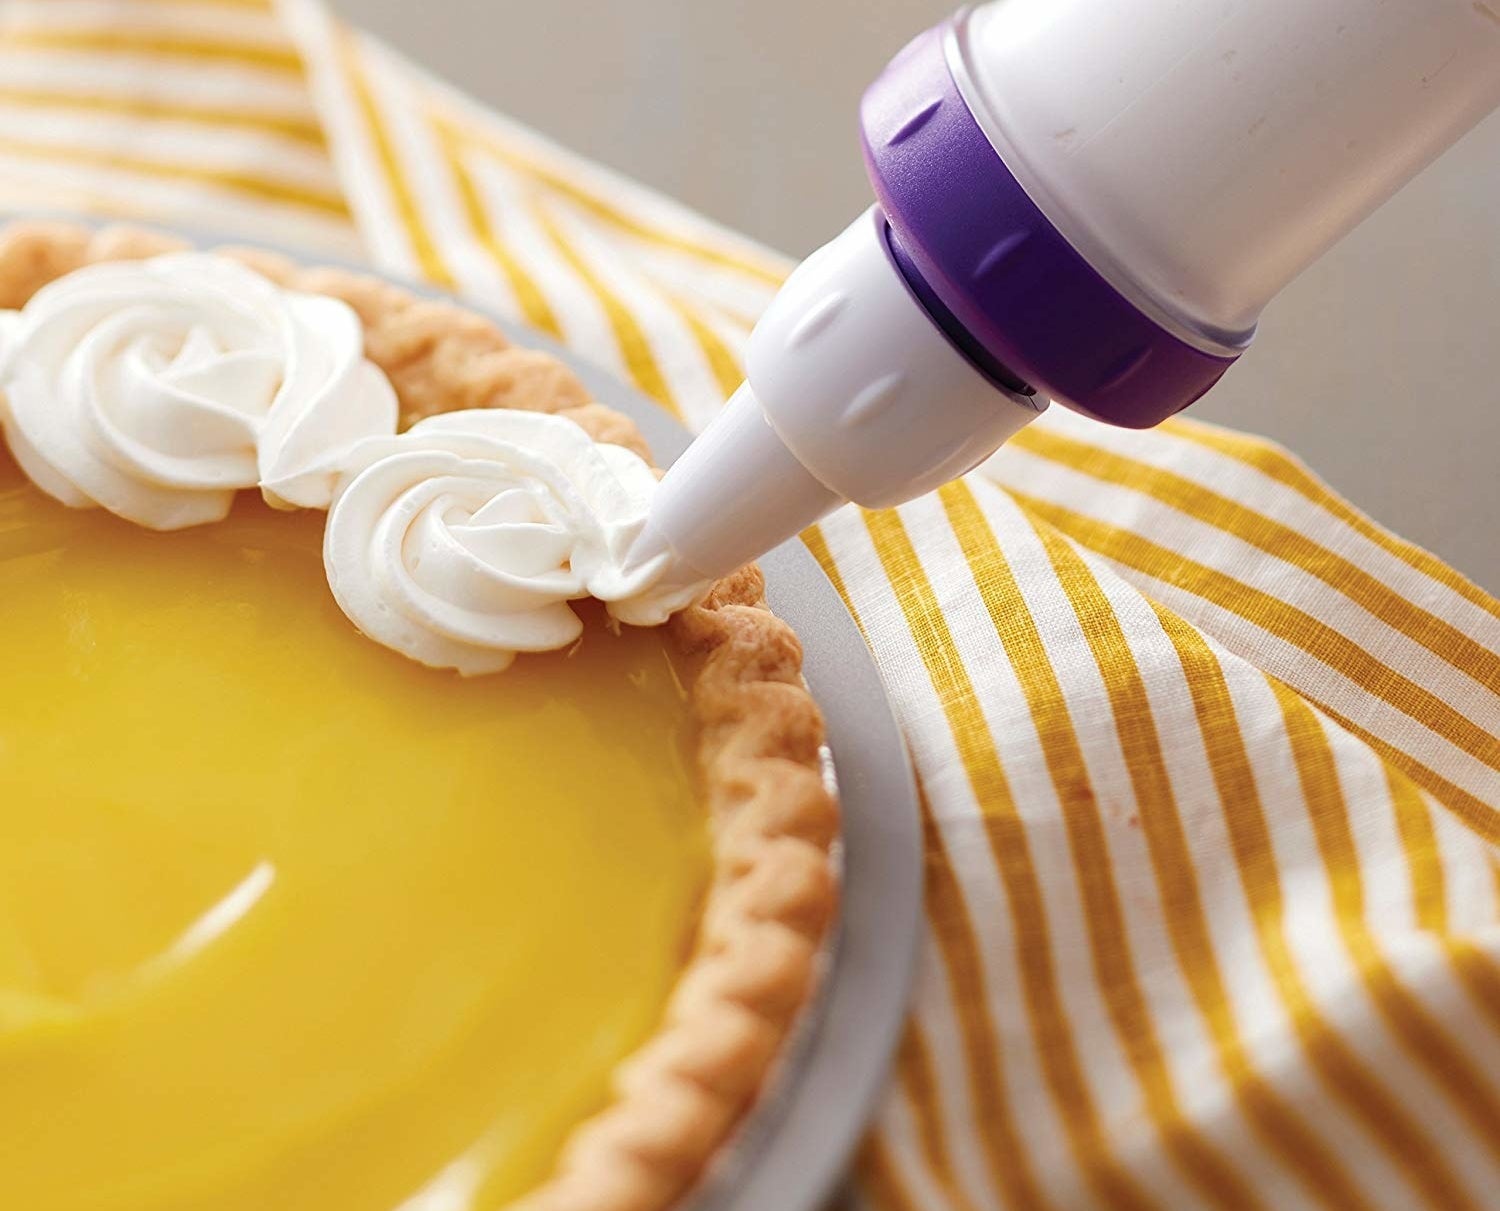 The decorating tool creating small, rose-like puffs of cream on a pie